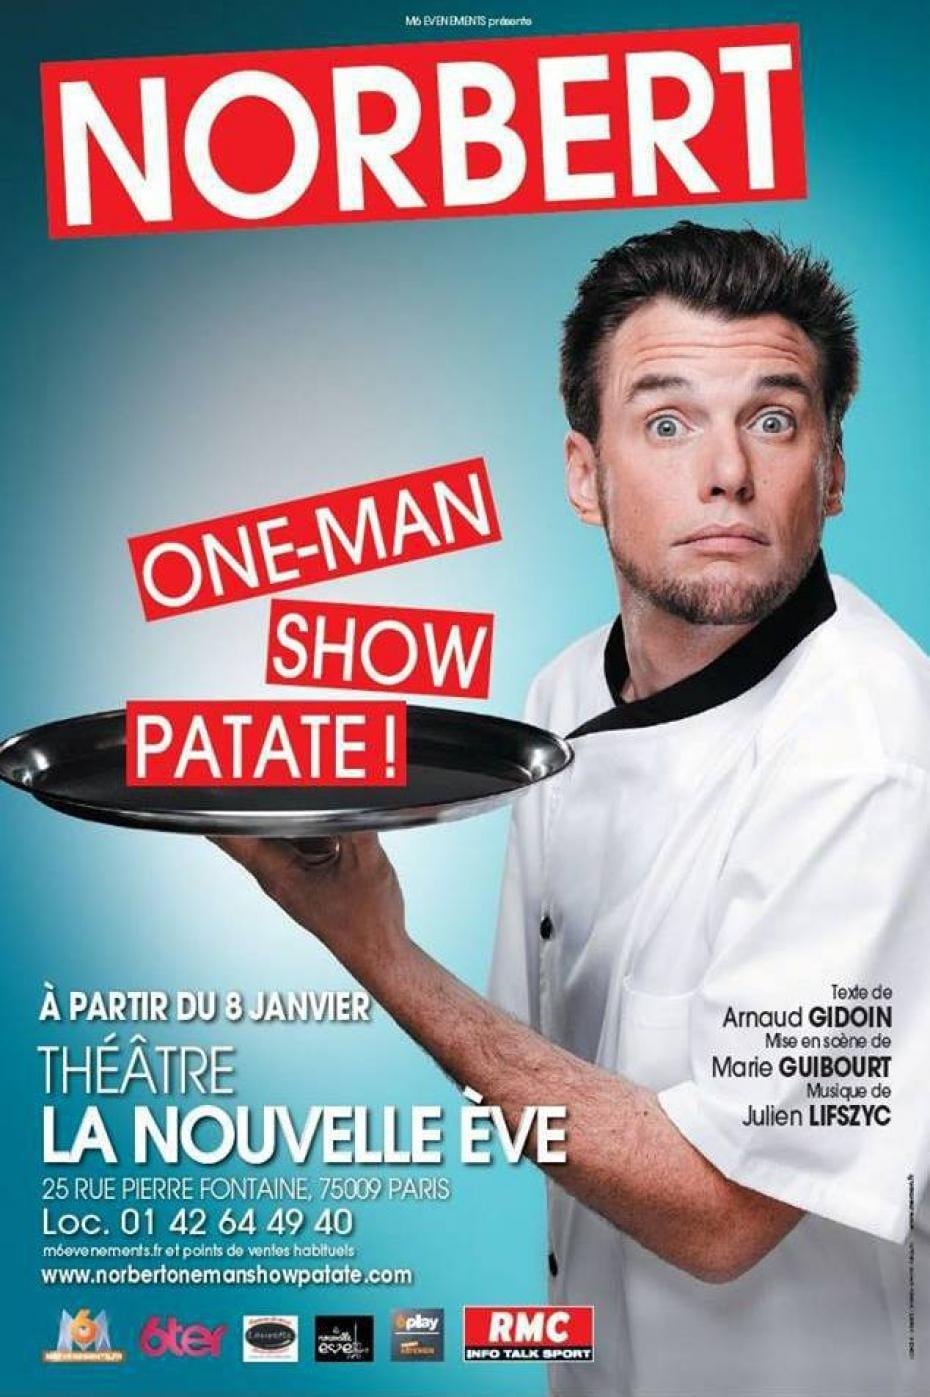 Norbert - One man show patate !